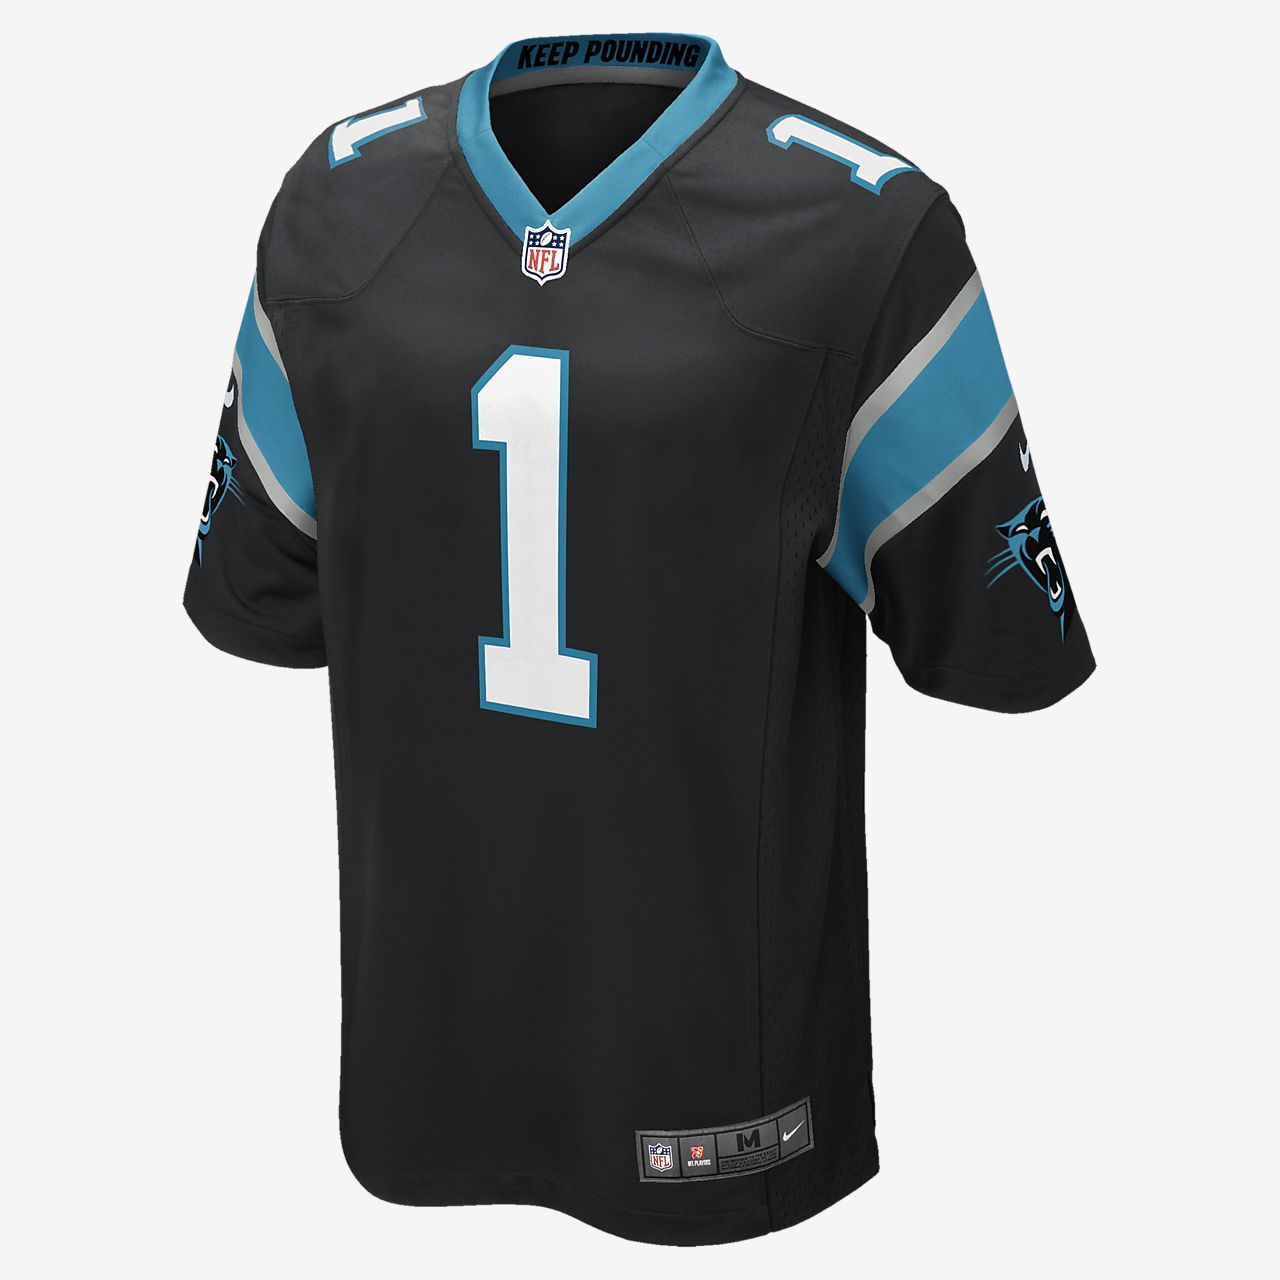 panthers nfl jersey